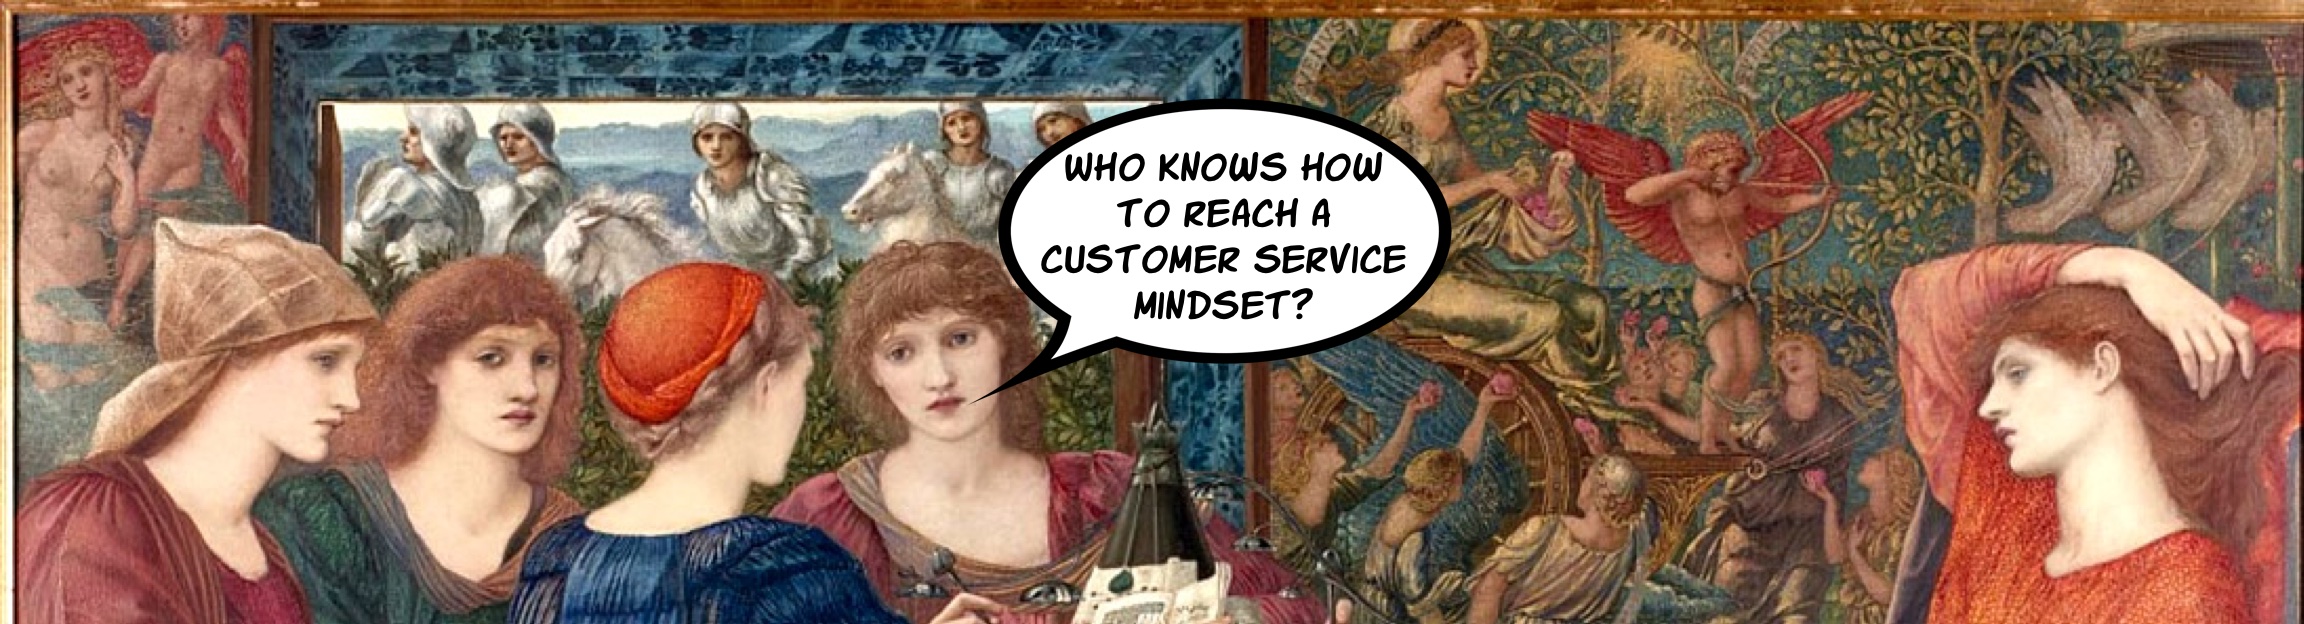 9 Ways to Grow a Customer Service Mindset in a Team